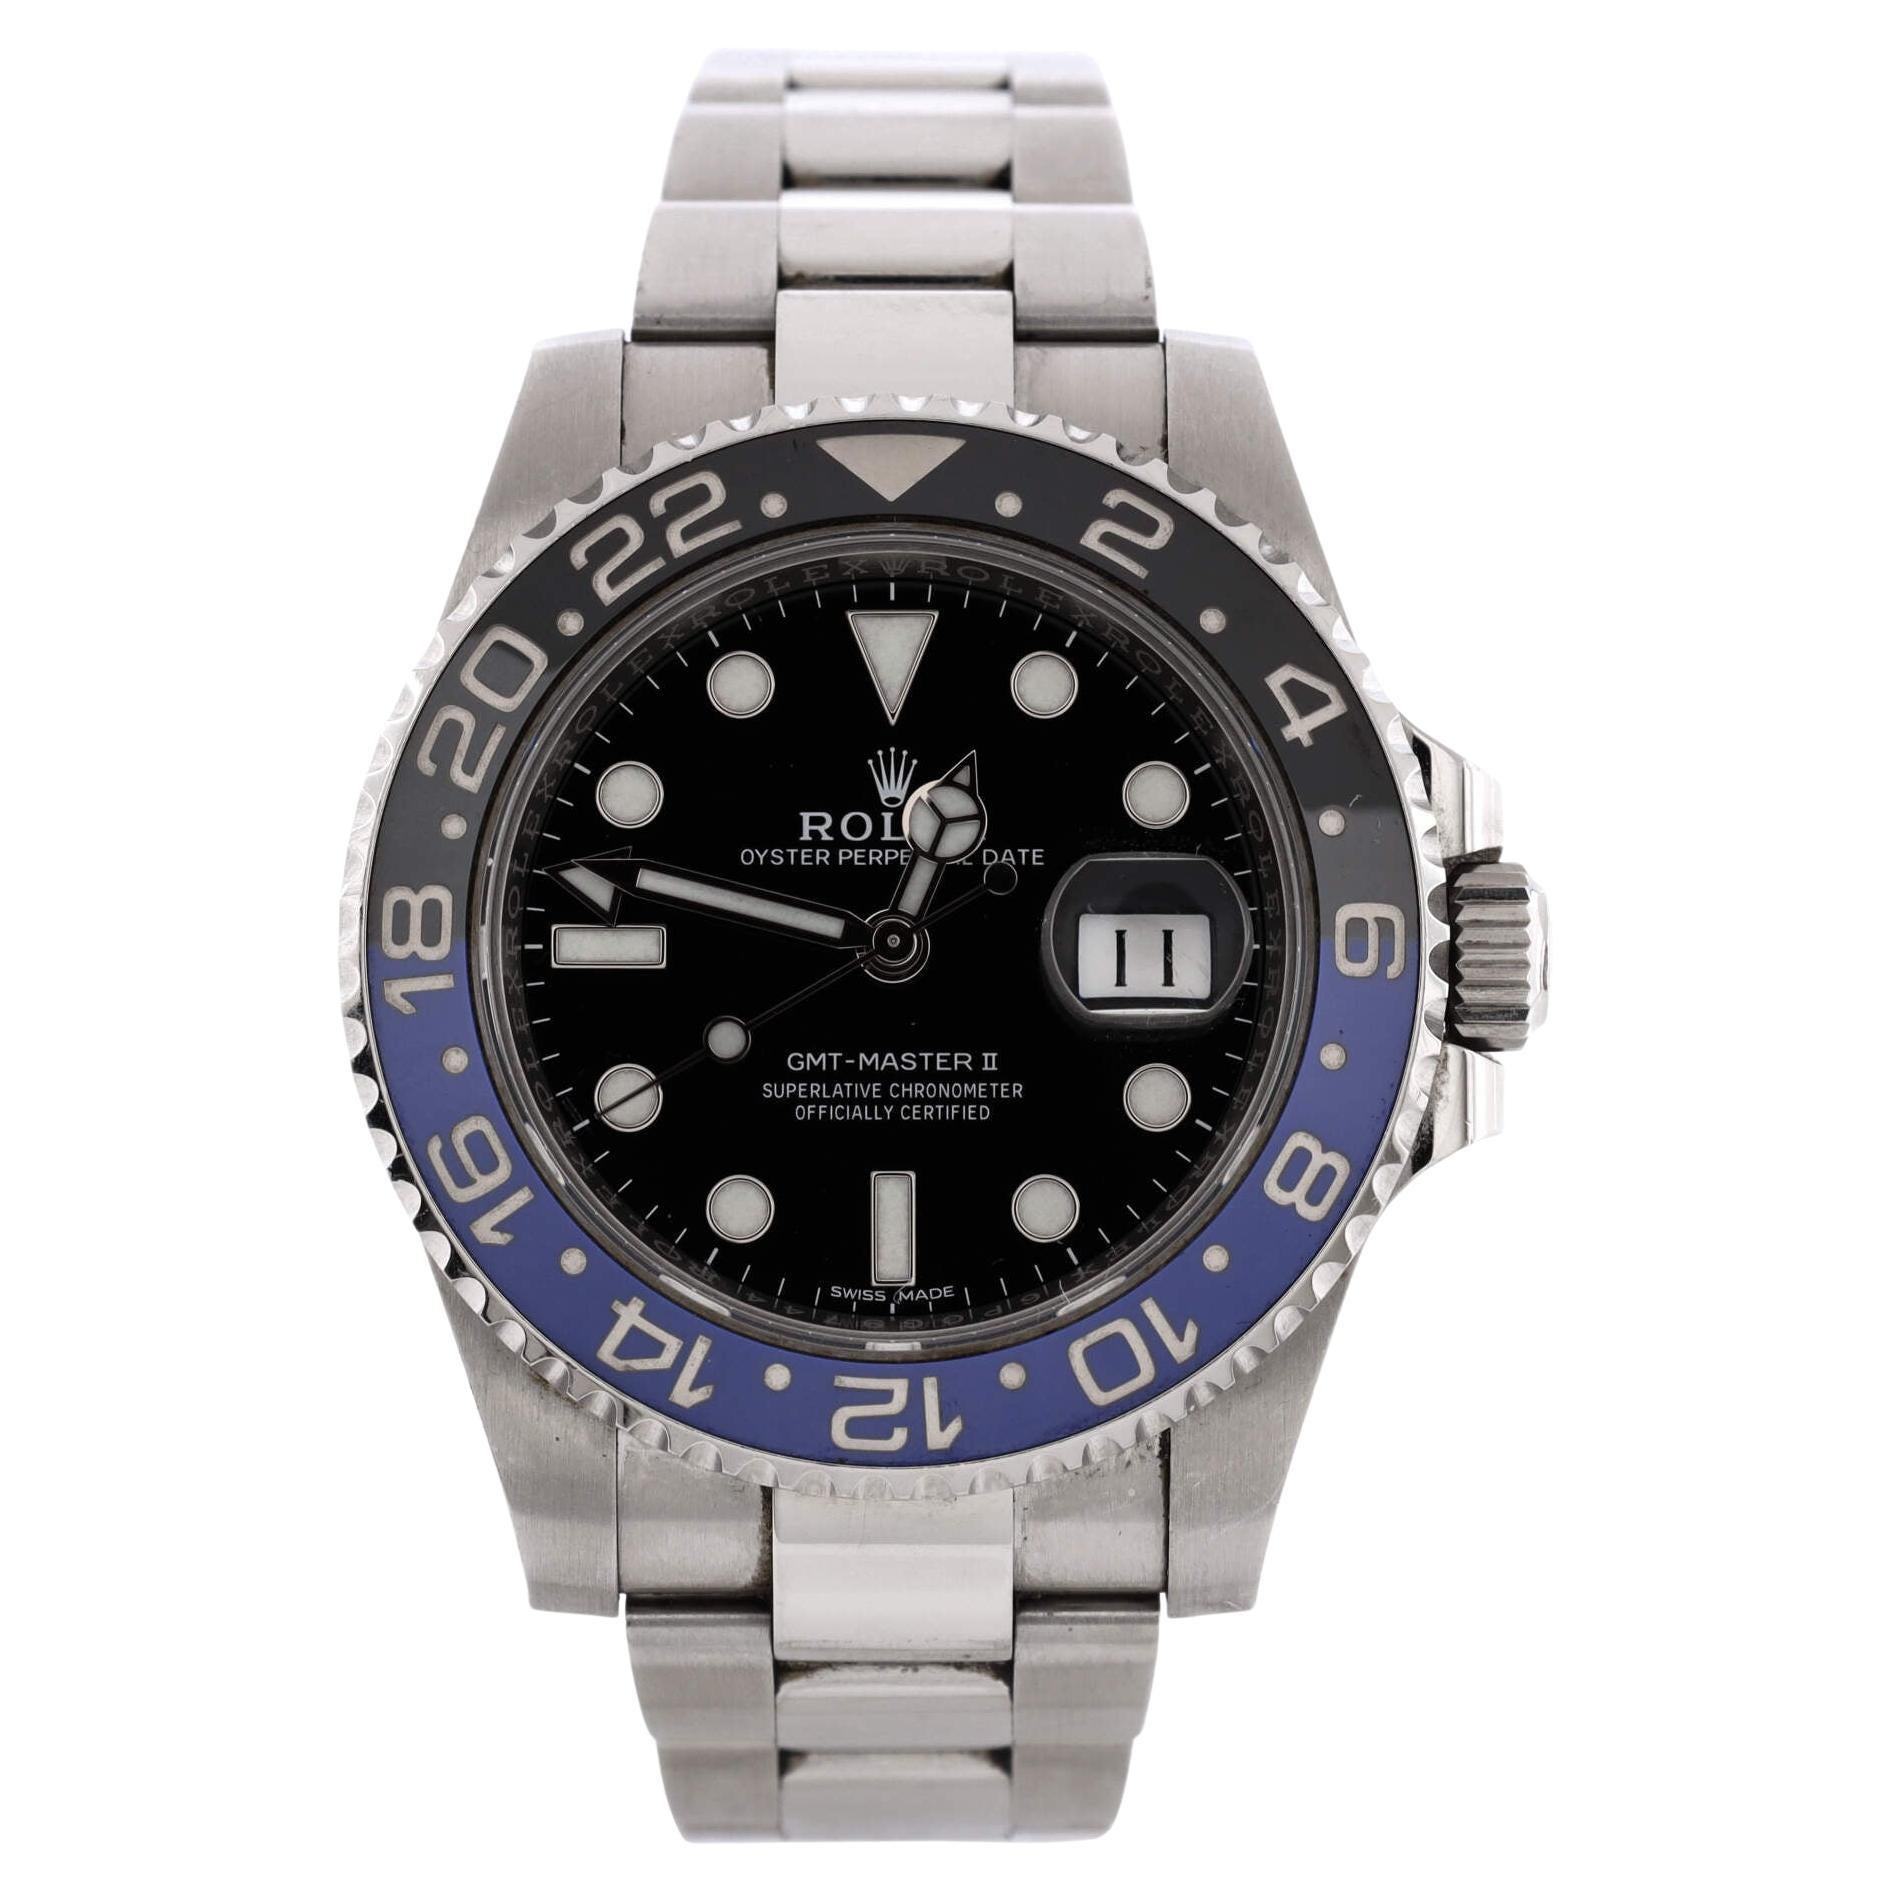 Rolex Oyster Perpetual Date GMT-Master II Batman Automatic Watch Stainles Steel